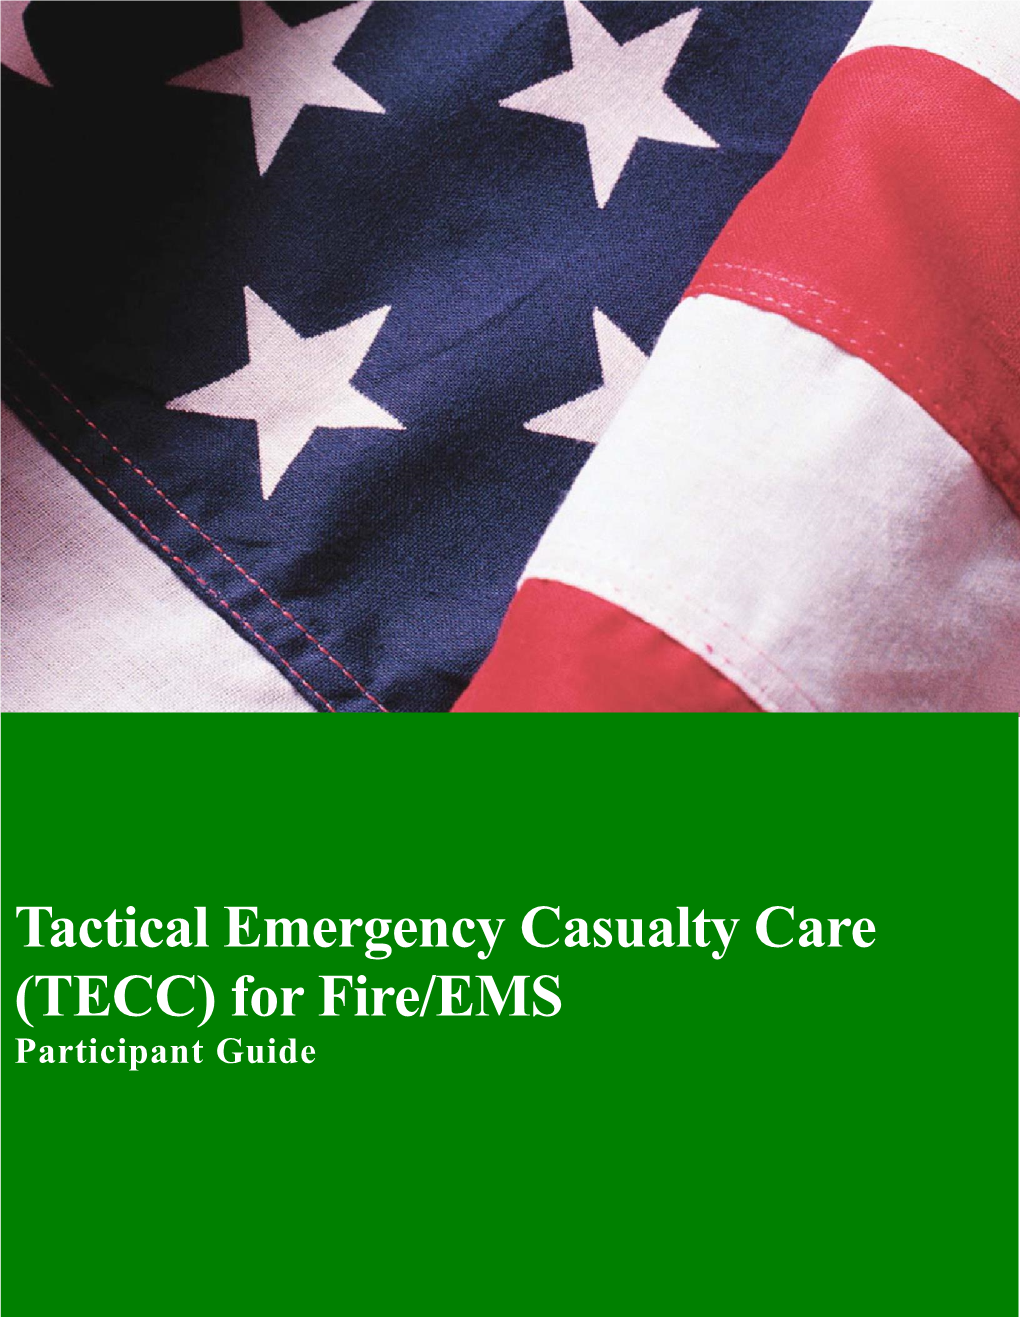 Tactical Emergency Casualty Care (TECC) for Fire/EMS Participant Guide